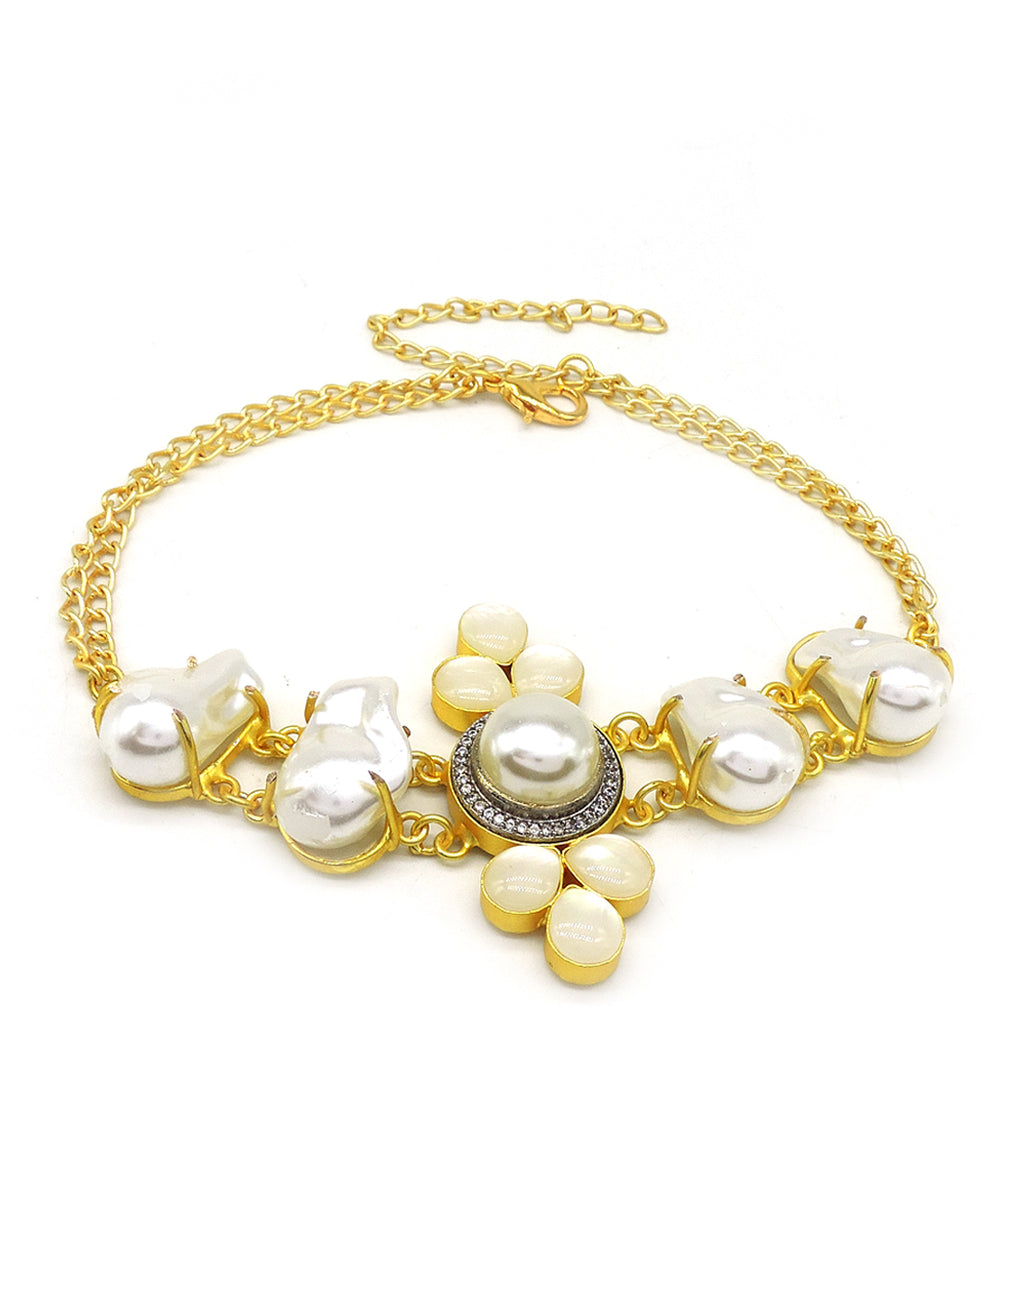 Jewelled Pearl Necklace - Statement Necklaces - Gold-Plated & Hypoallergenic Jewellery - Made in India - Dubai Jewellery - Dori